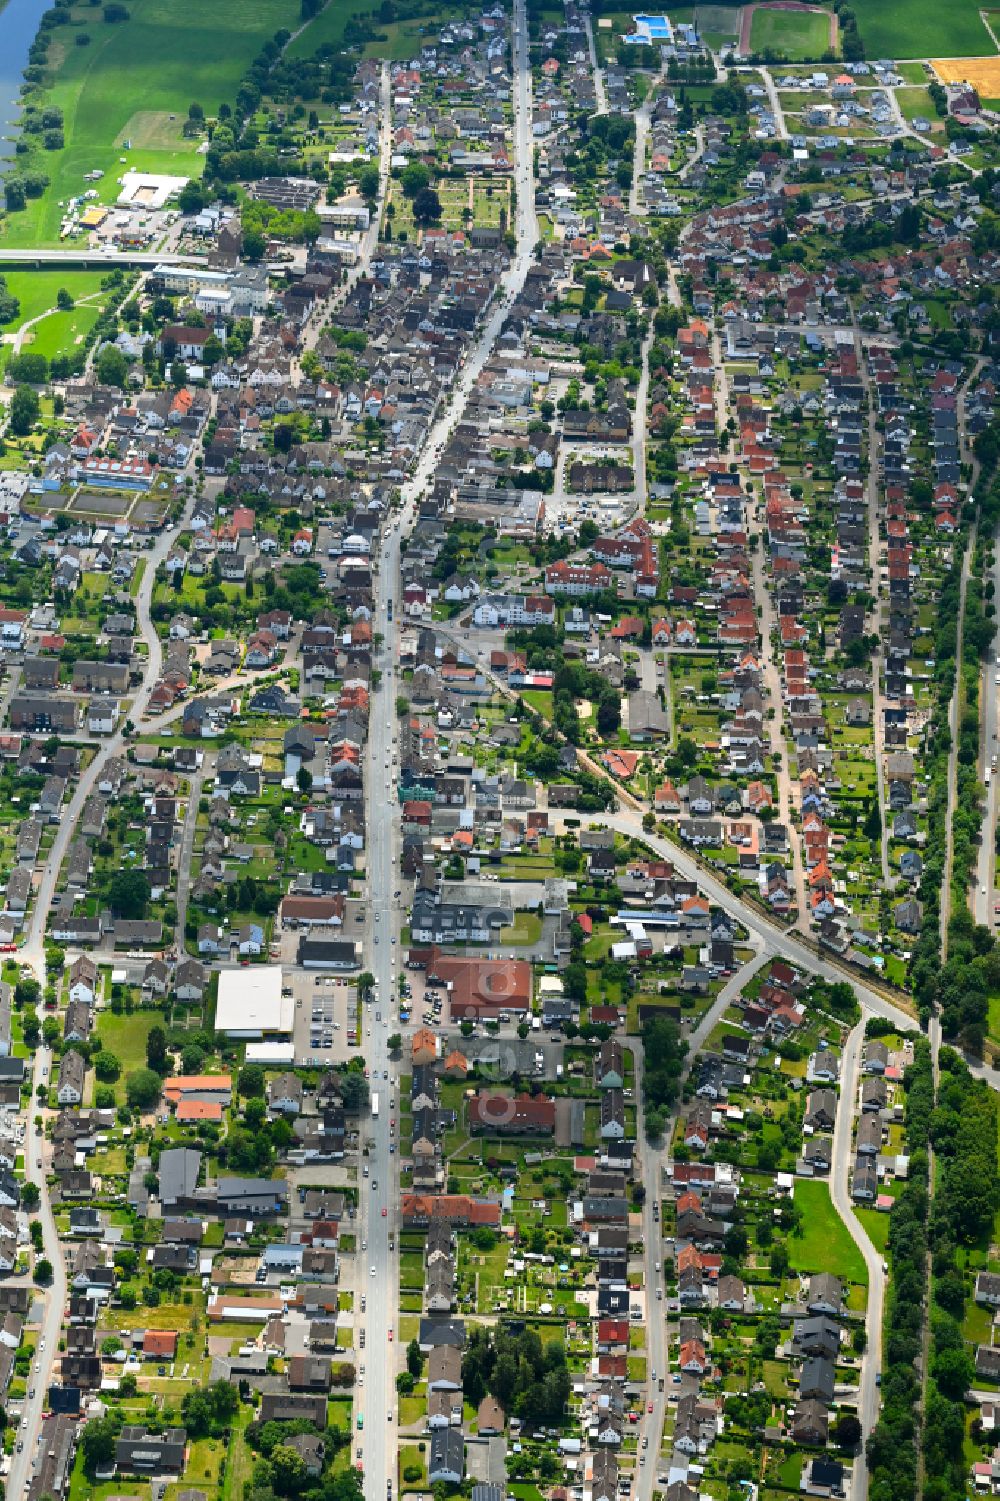 Beverungen from the bird's eye view: The city center in the downtown area in Beverungen in the state North Rhine-Westphalia, Germany